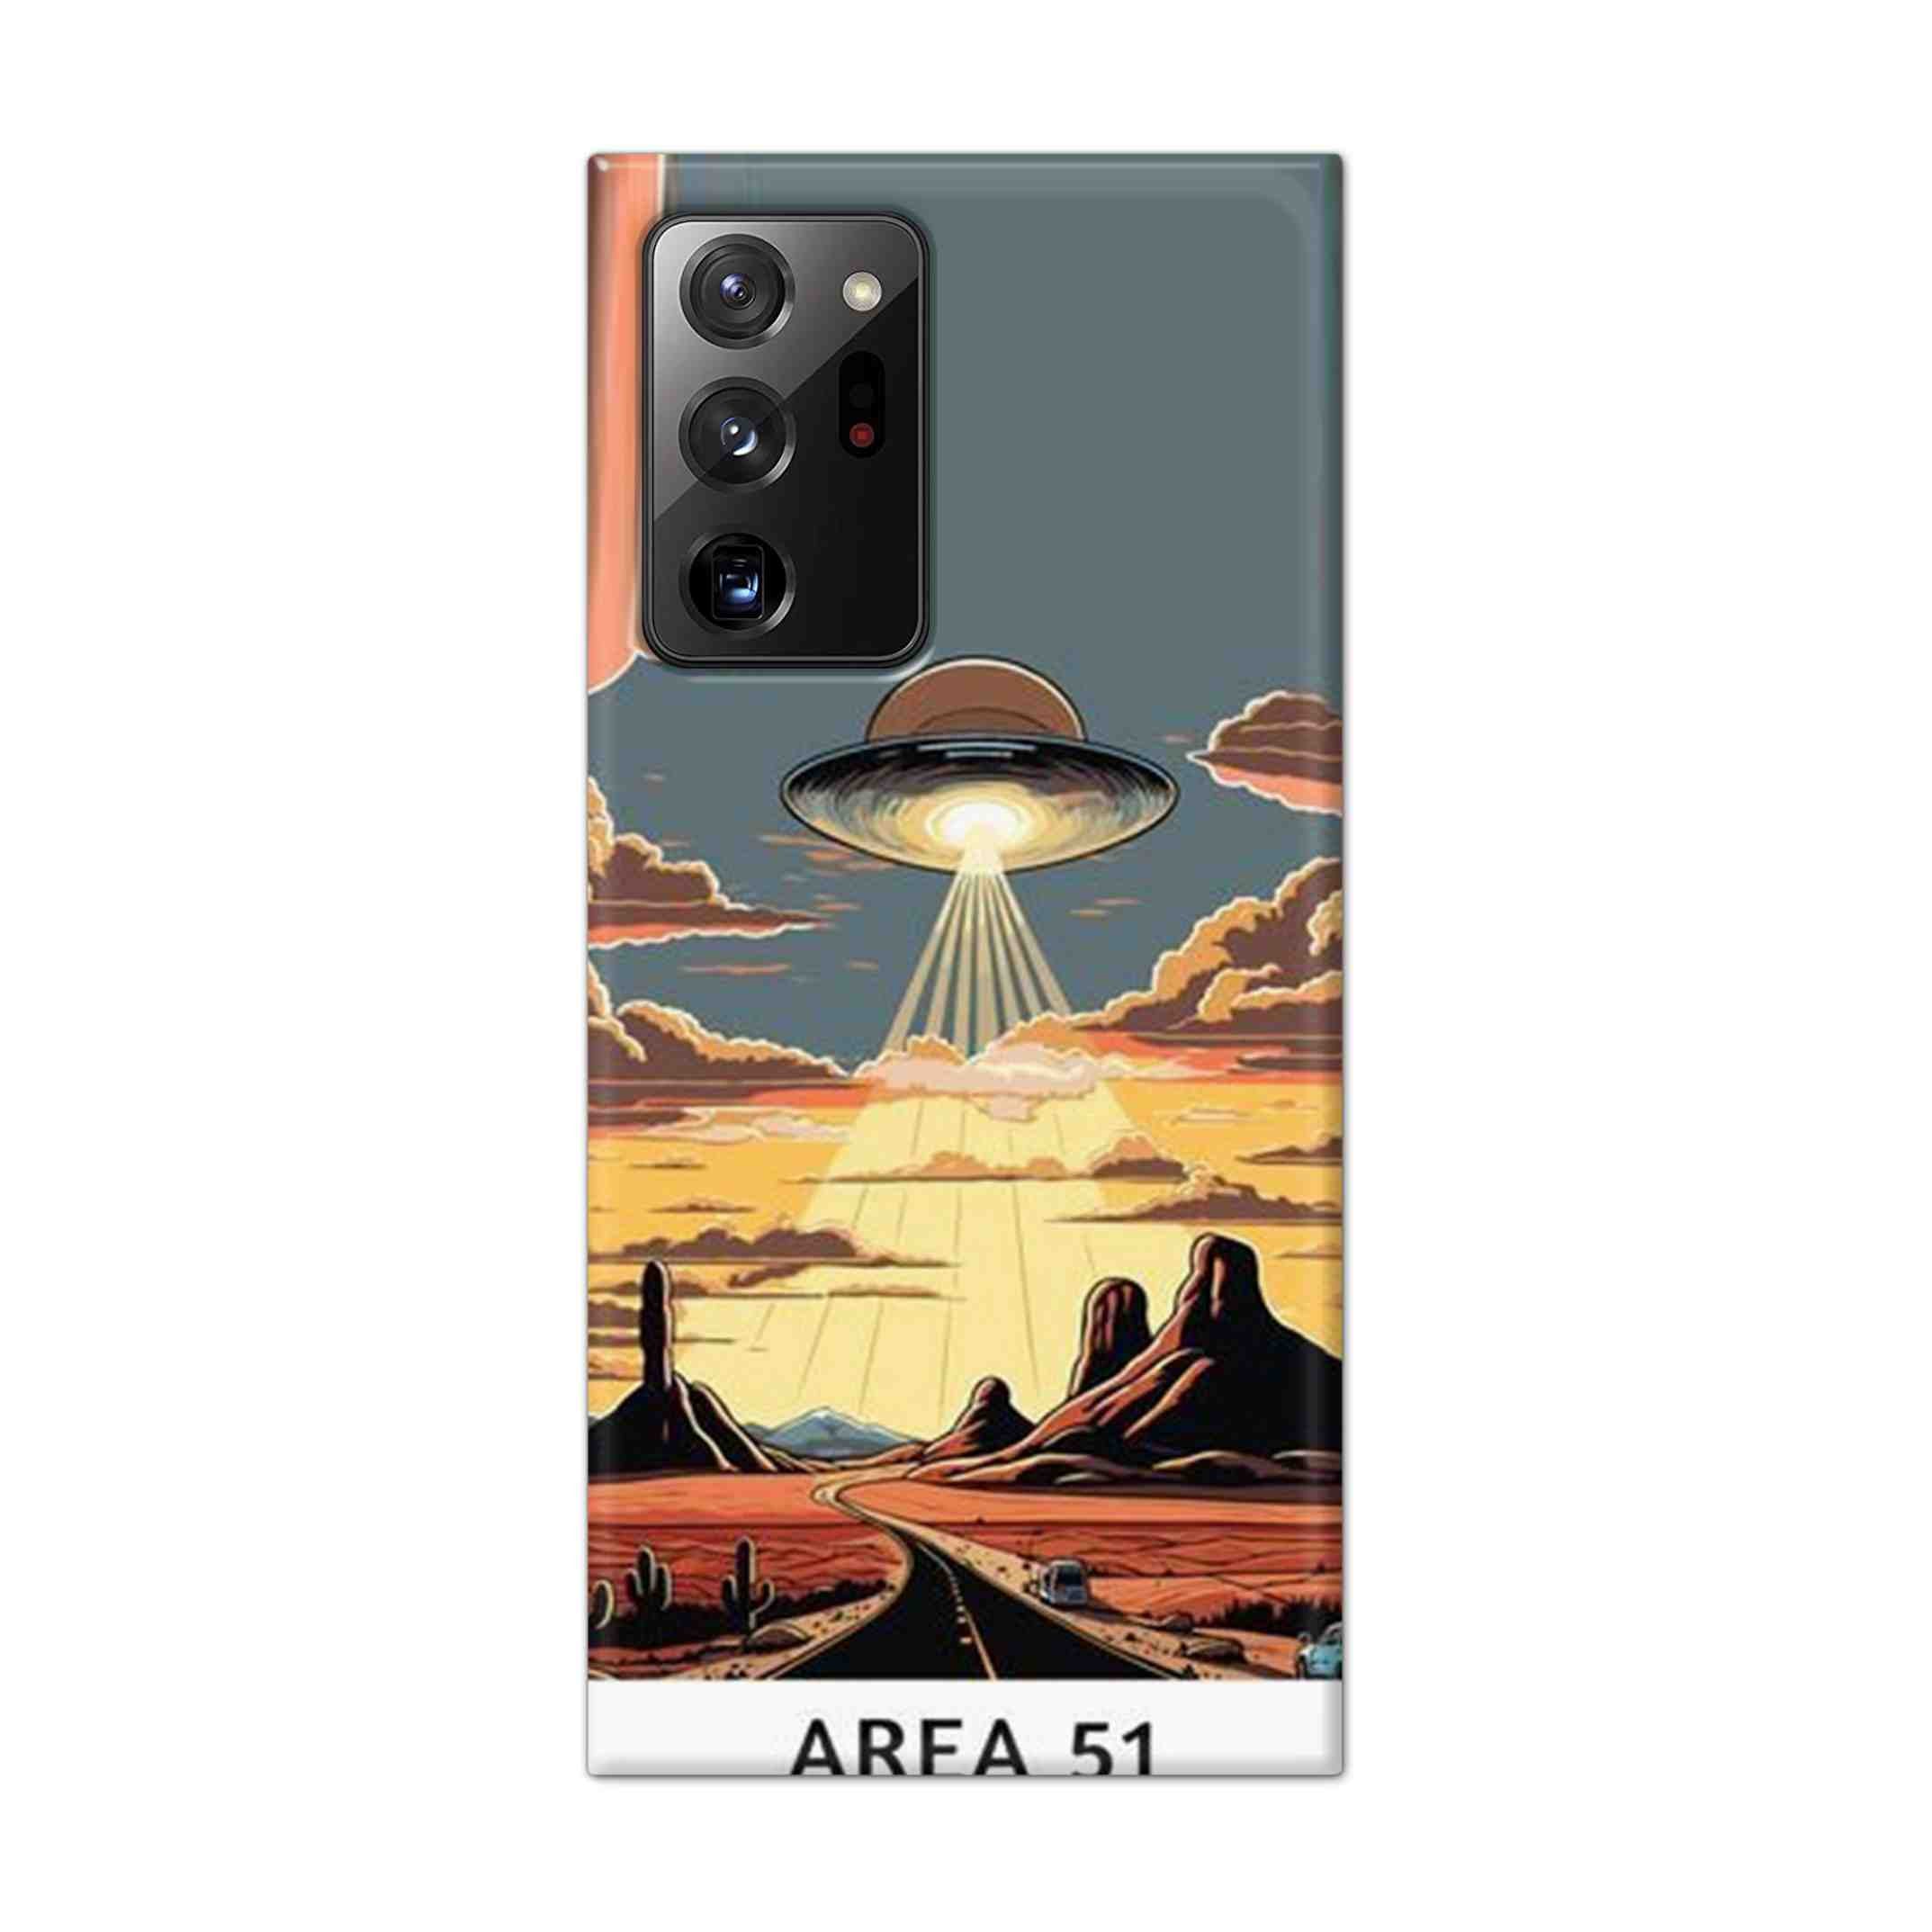 Buy Area 51 Hard Back Mobile Phone Case Cover For Samsung Galaxy Note 20 Ultra Online